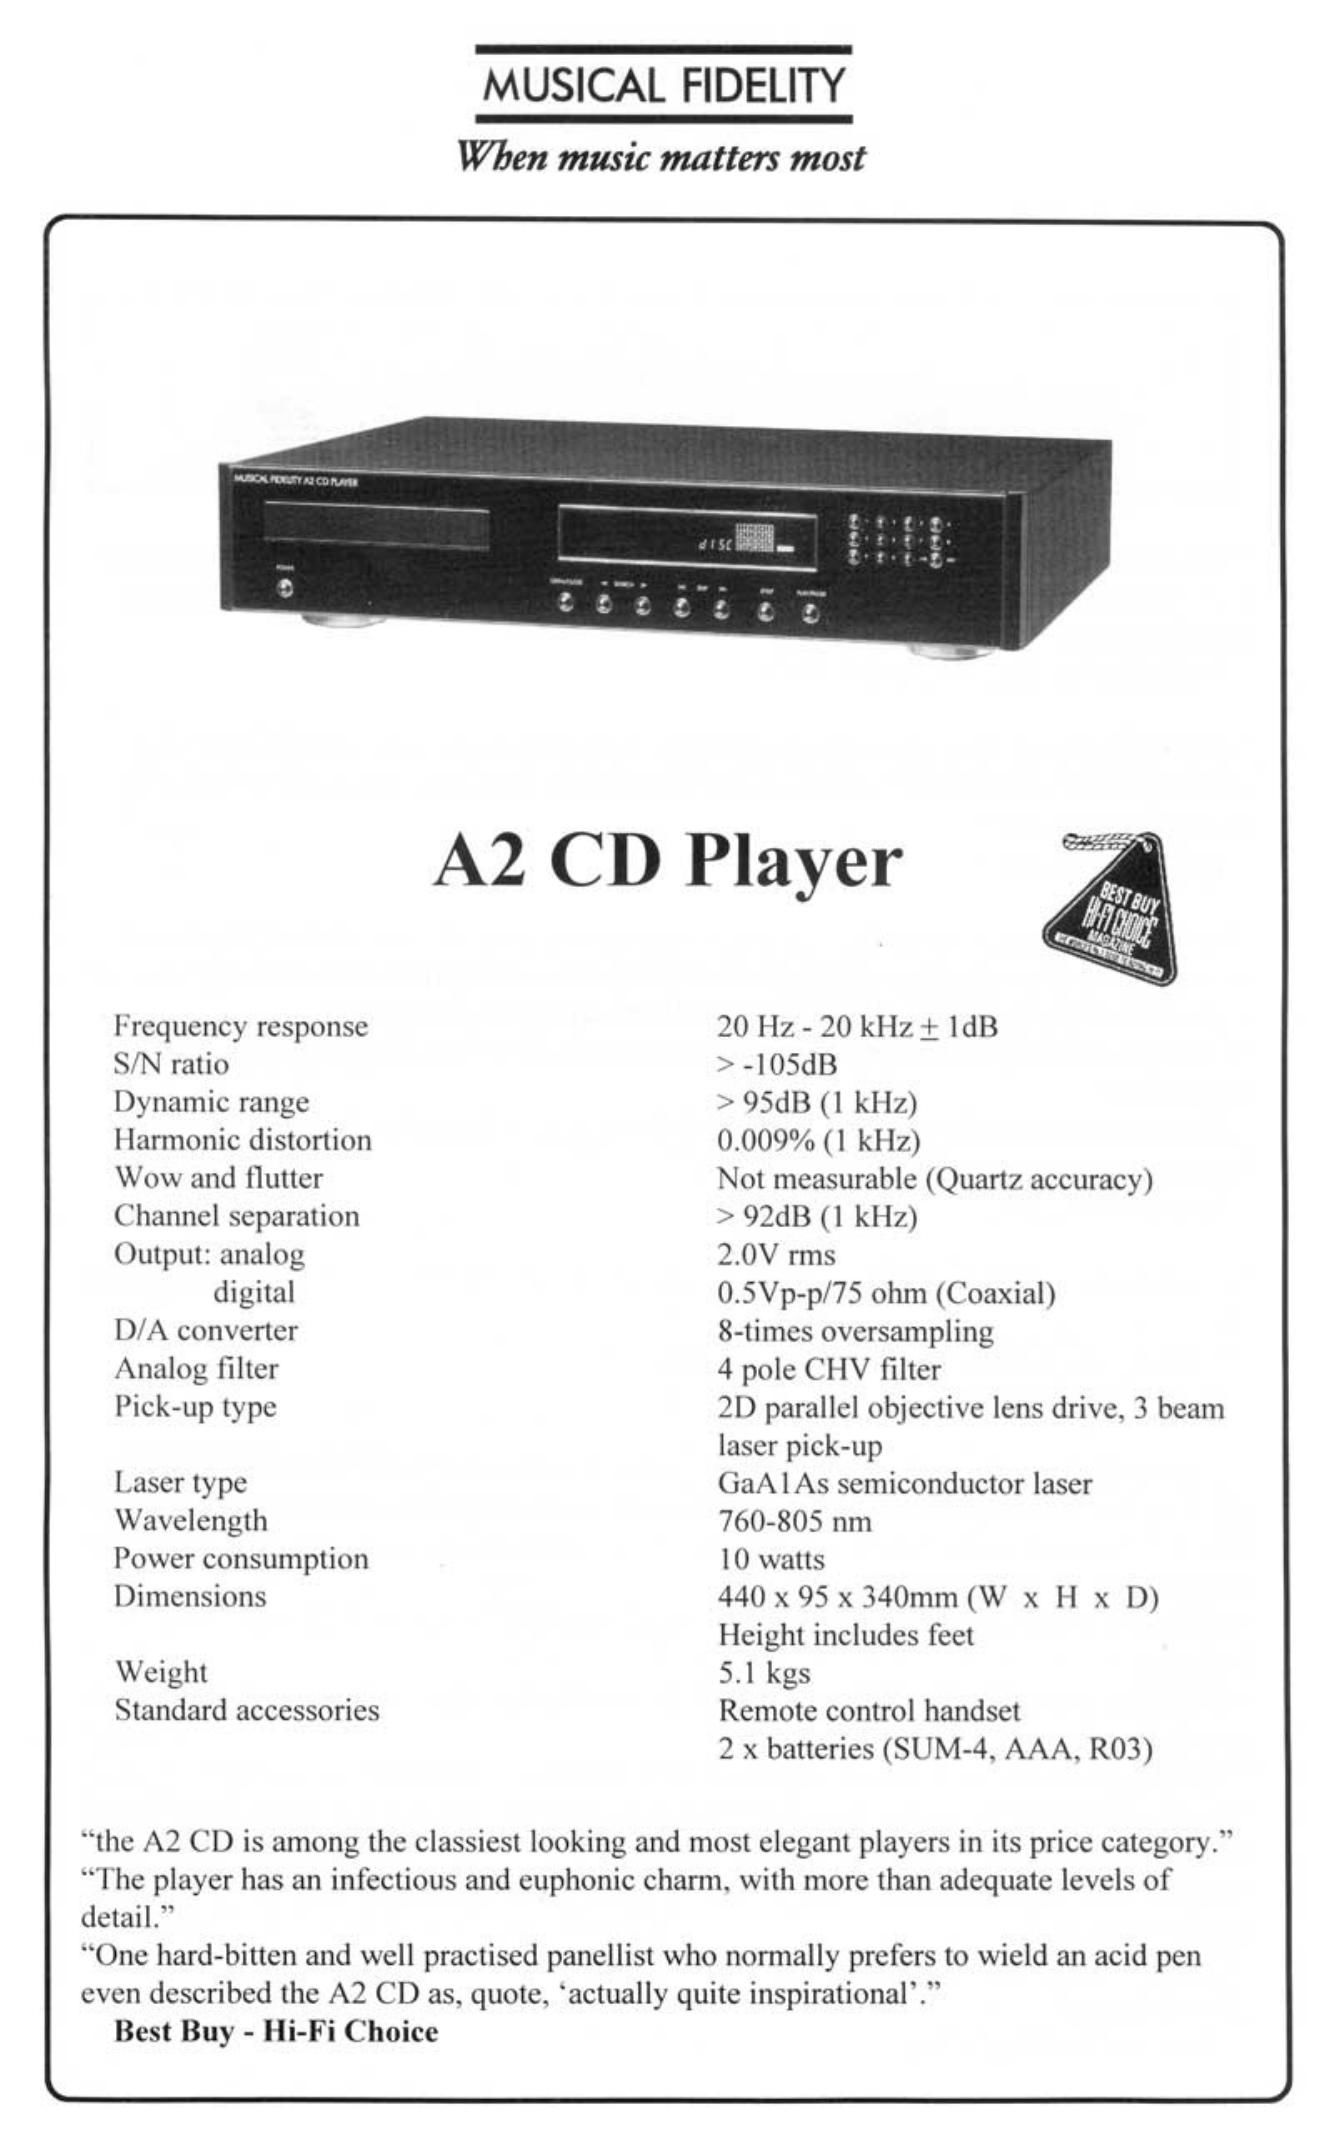 musical fidelity a 2 cd player brochure